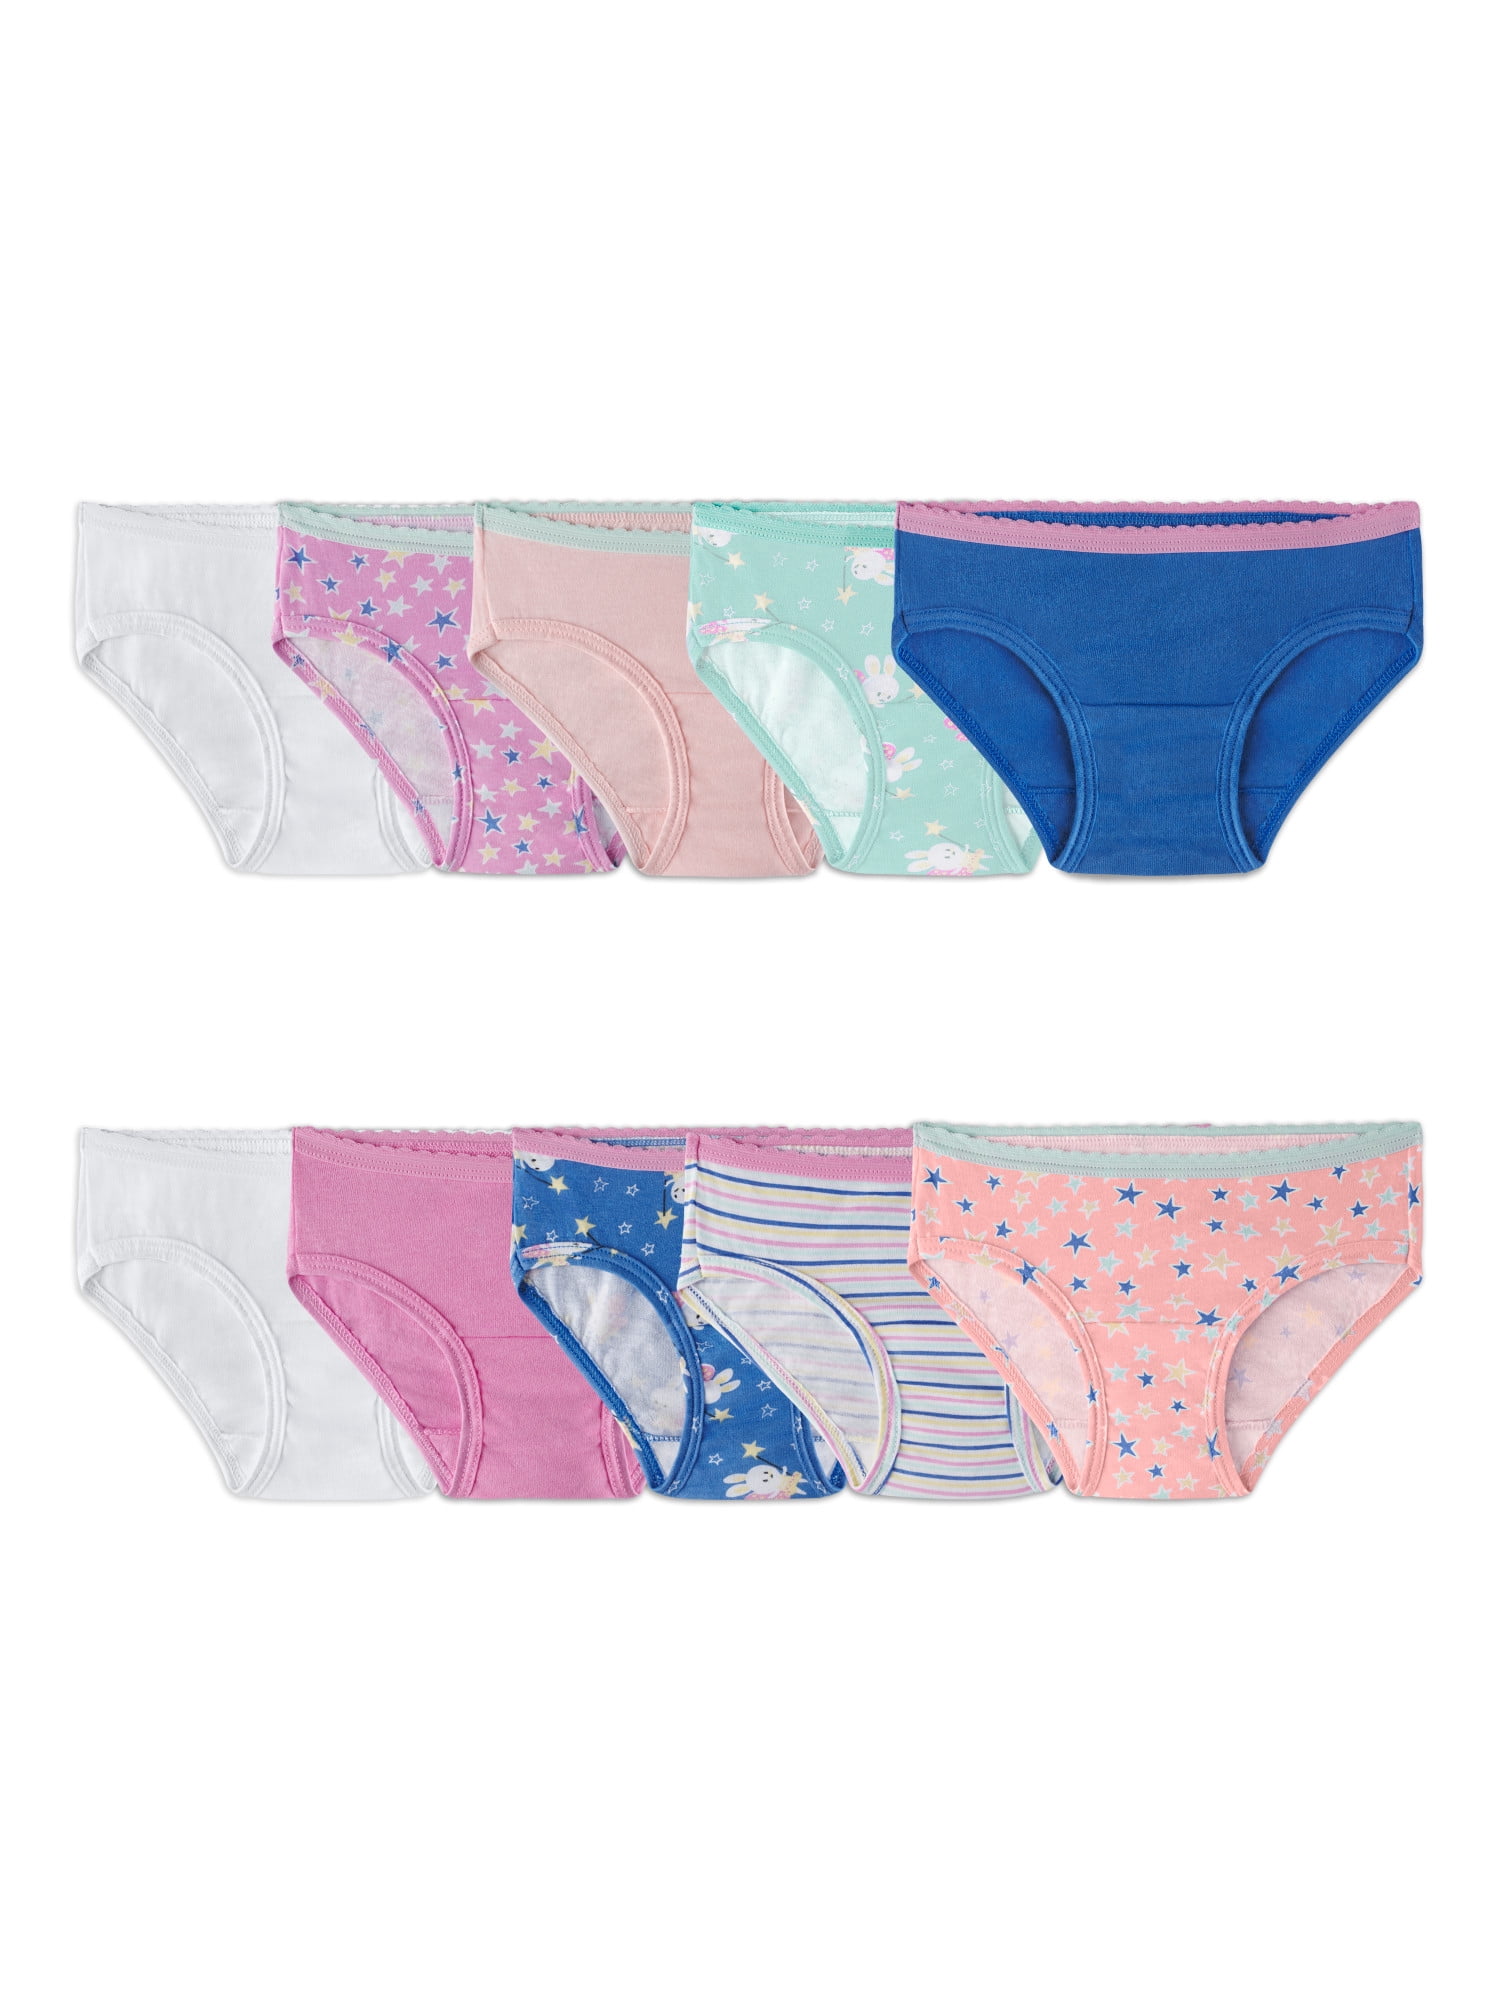 Fruit of the Loom Toddler Girl EverSoft Cotton Hipster Underwear